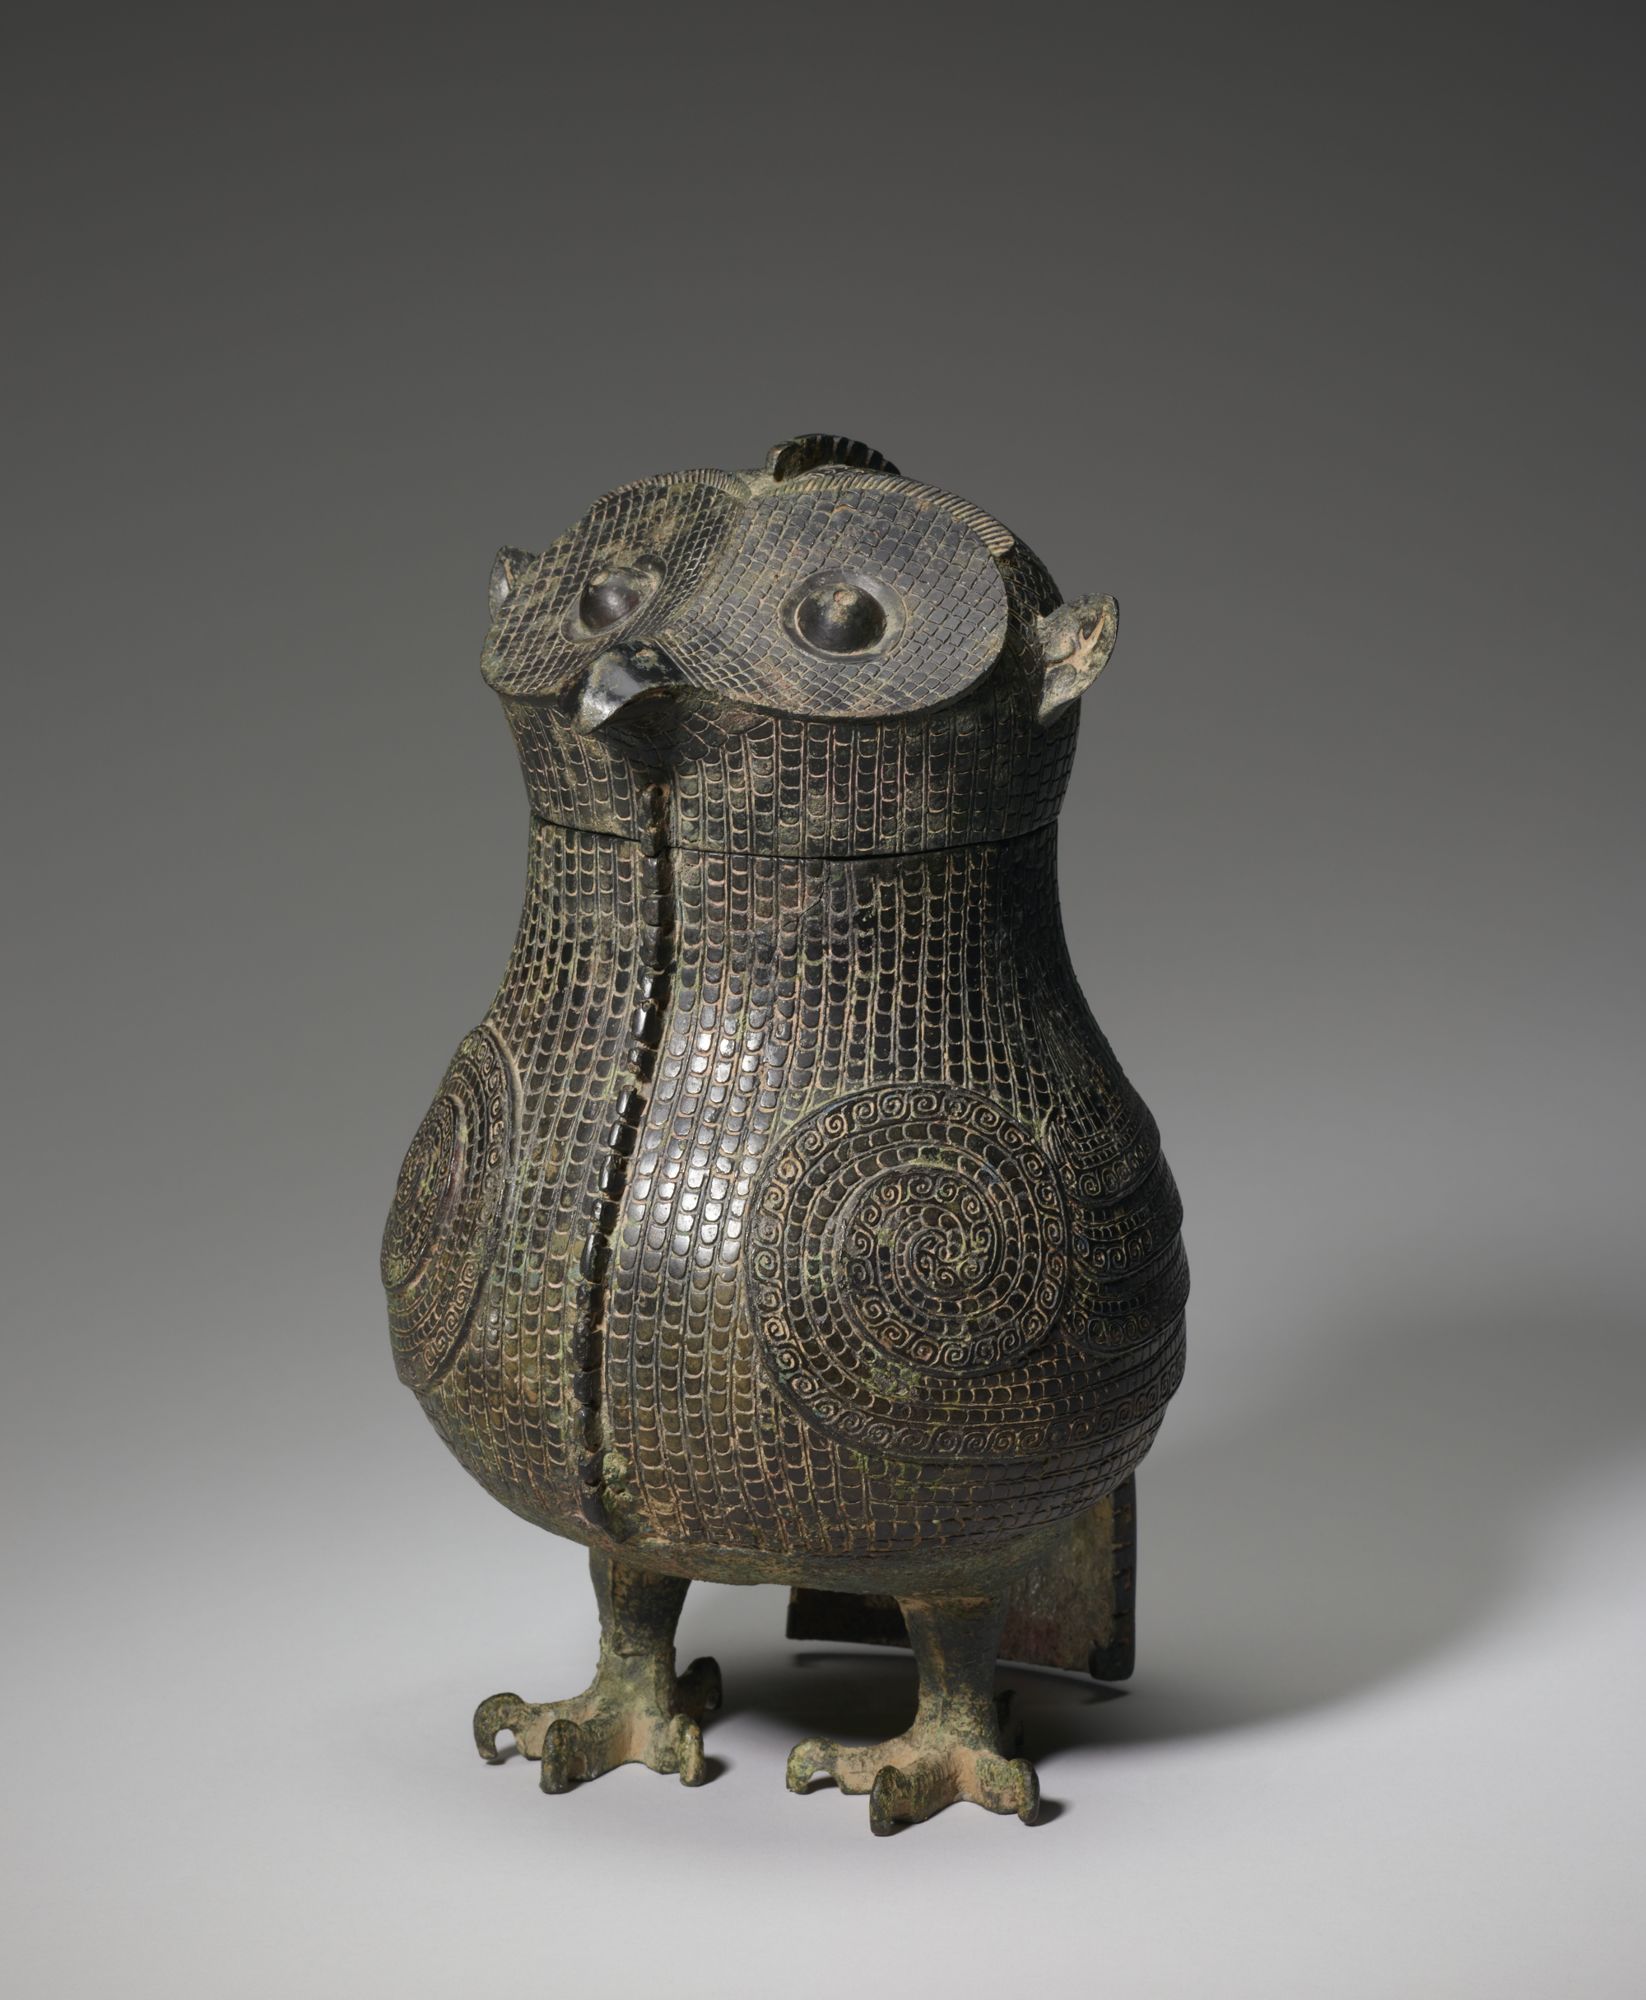 This ornate bronze wine vessel in the shape of an owl dates back to the 13th century BCE.